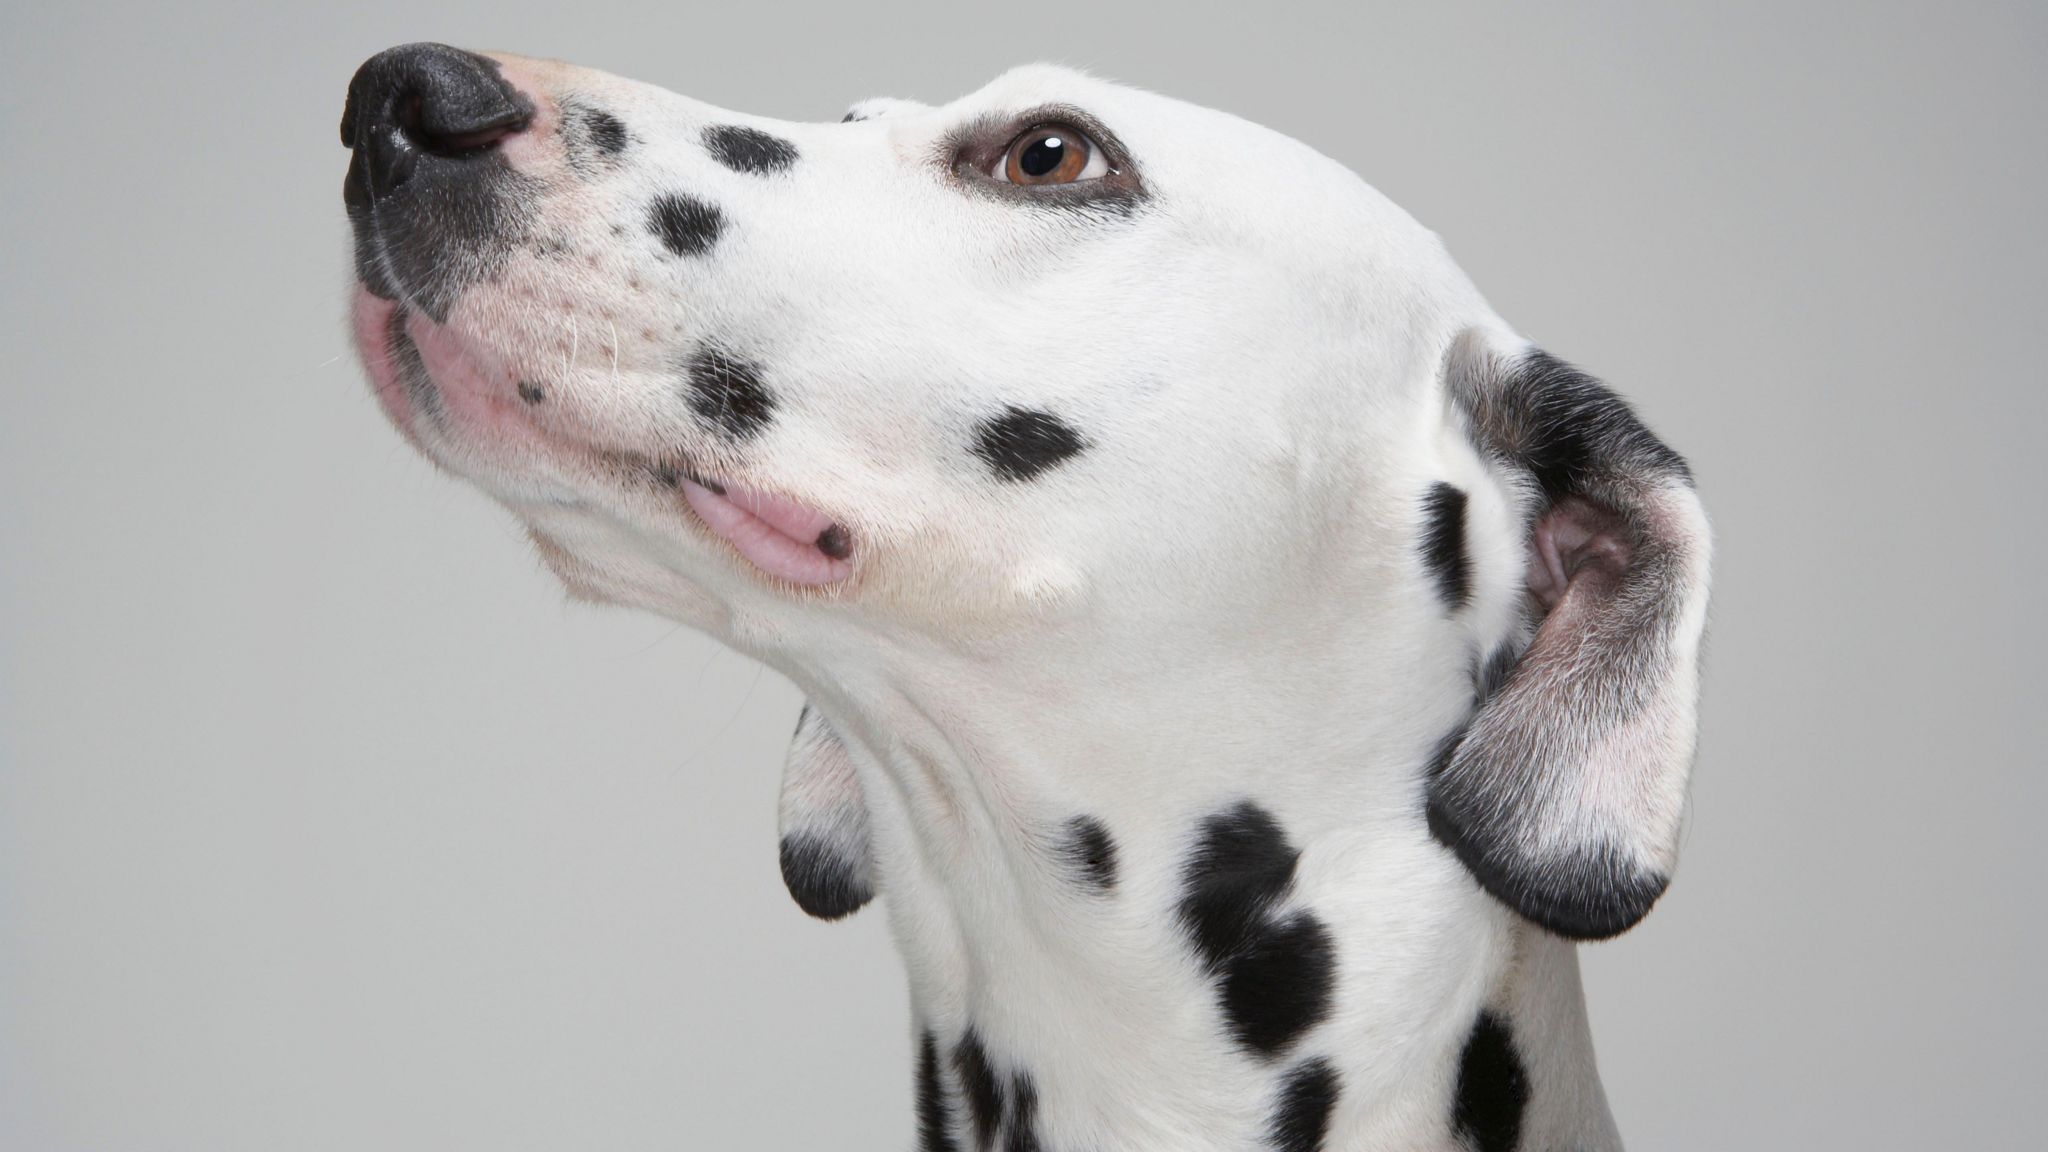 A close up of a Dalmatian's head where you can see the irregular spotted pattern